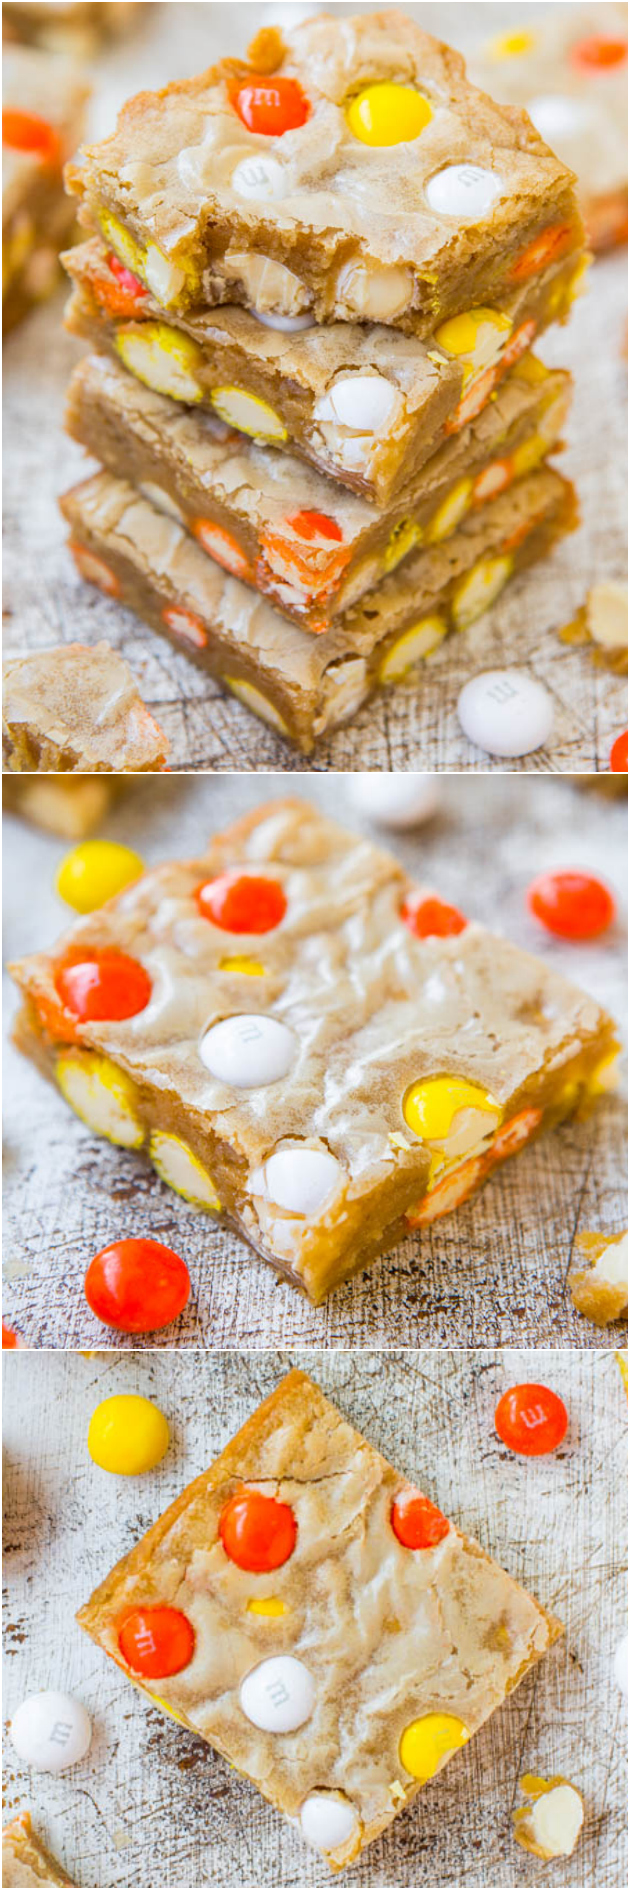 Candy Corn White Chocolate M&M's Blondies — Seasonal white chocolate M&M's are studded through these M&M's blondies. The perfect Halloween dessert for adults AND kids!